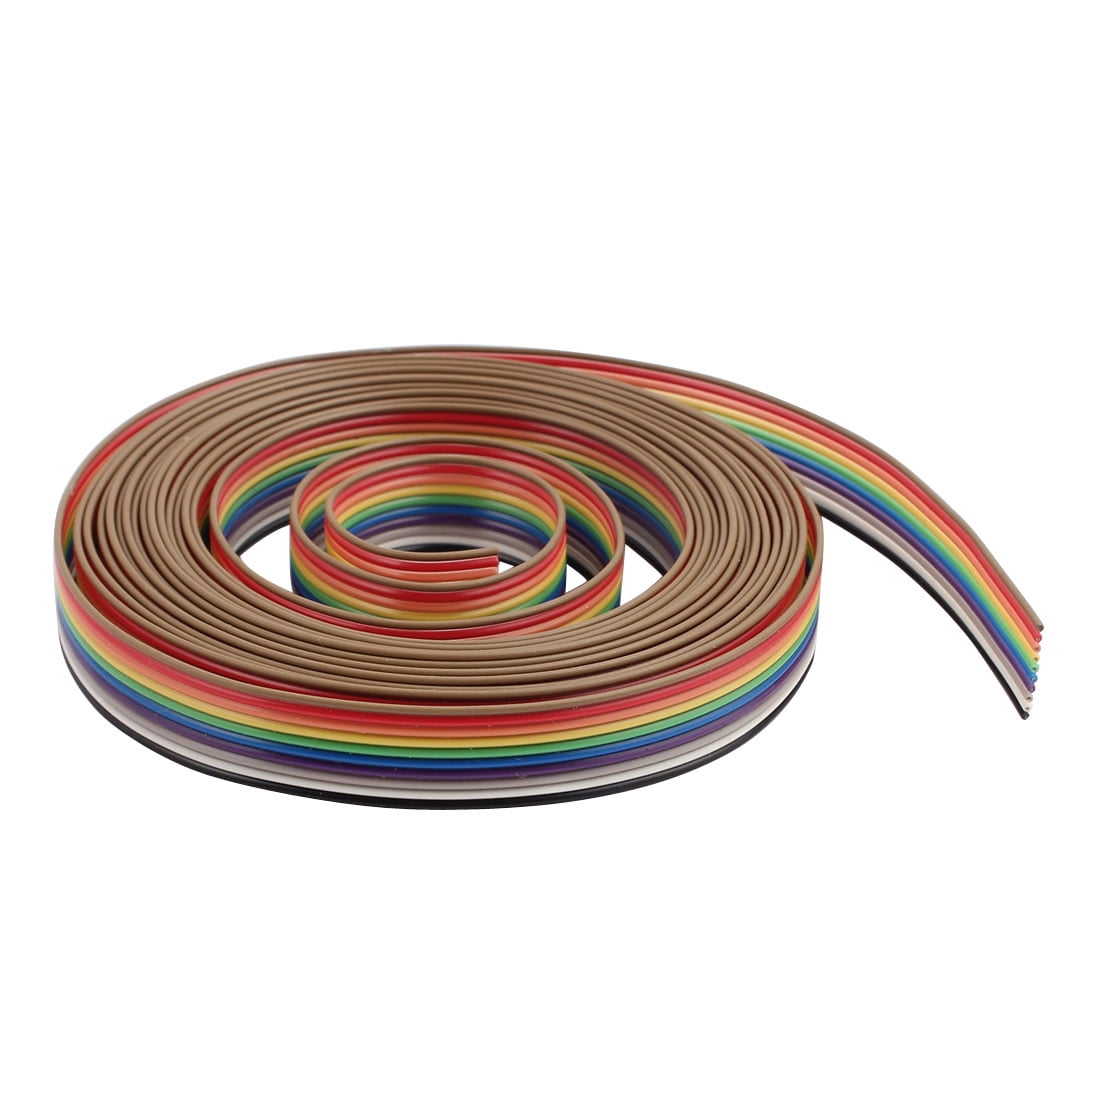 NEW 1.27mm Spacing Pitch10 WAY 10P Flat Color Rainbow Ribbon Cable Wiring Wire 